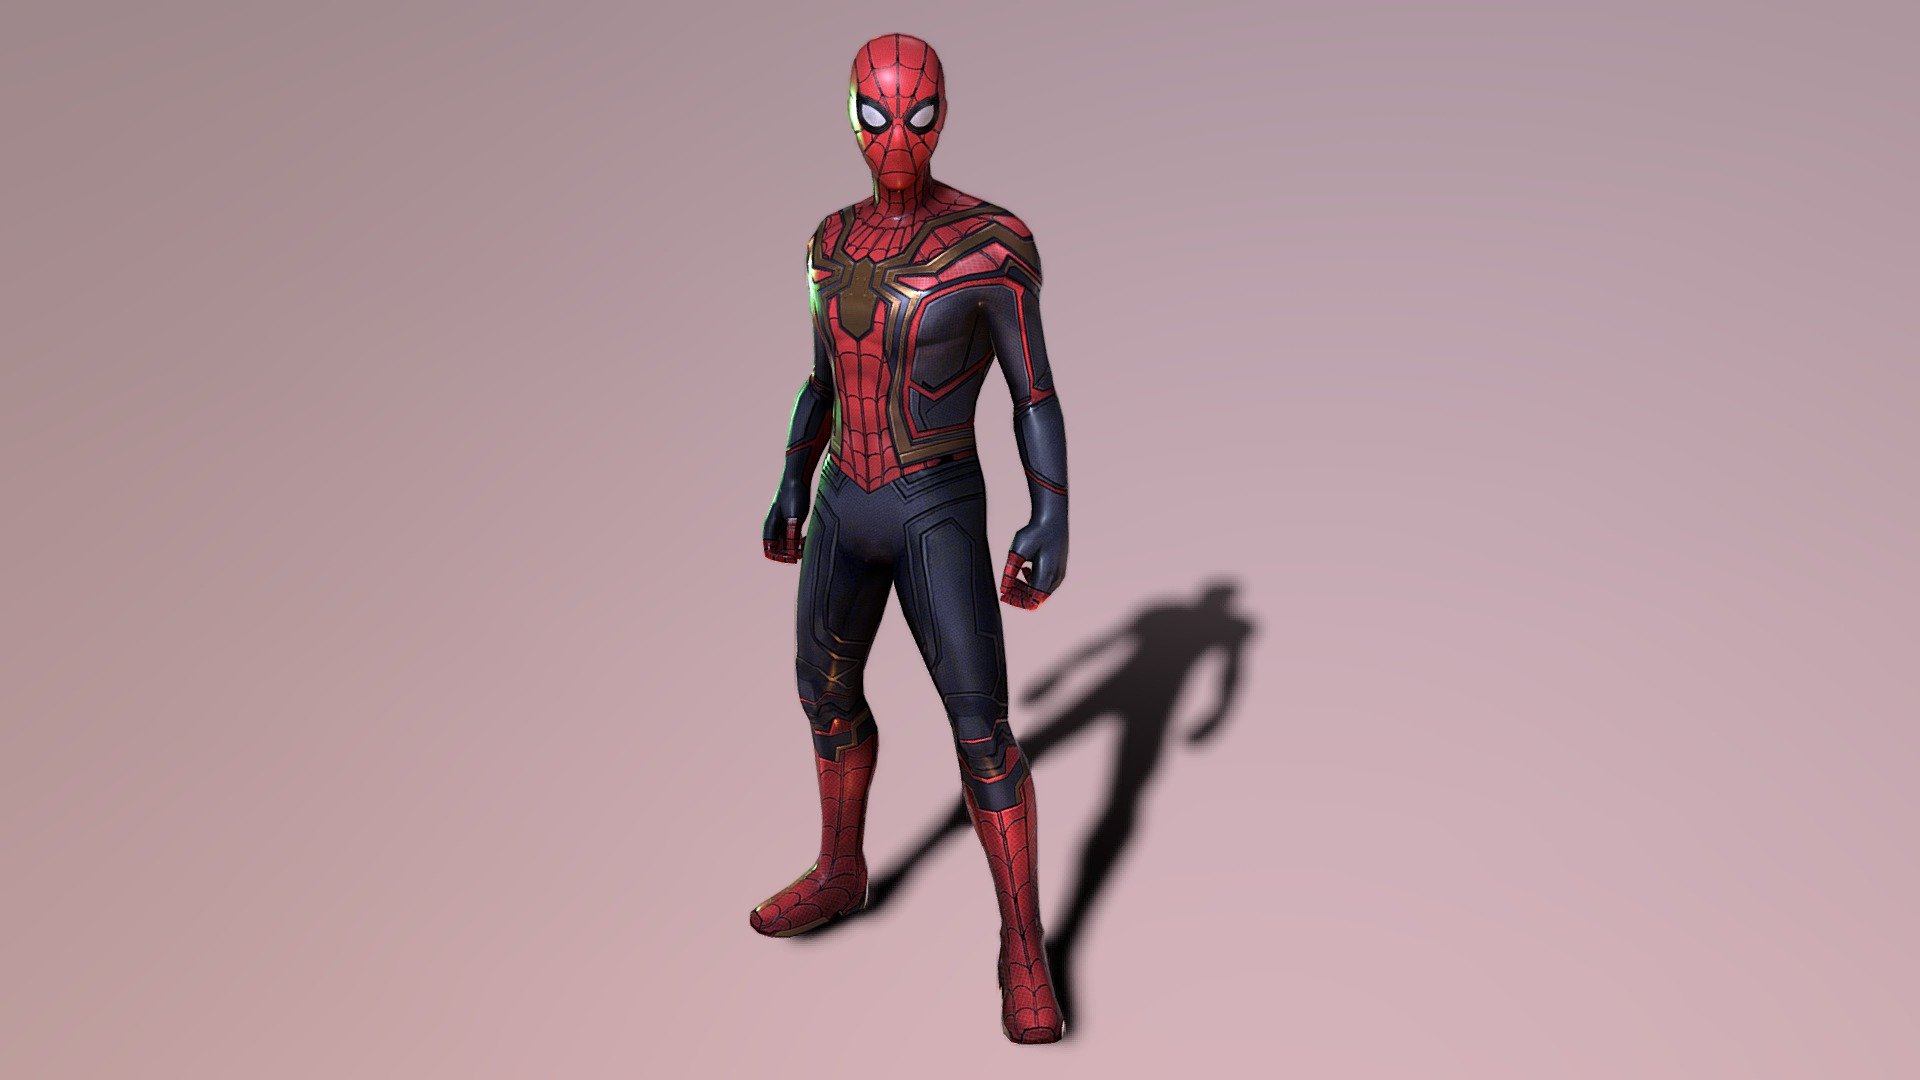 Spider-man of Spider-man: No Way Home.
Don't forget to suscribe to my channel for make more models. https://www.youtube.com/@spiderw4r3 - Spider-man from Spider-man: No way Home - Download Free 3D model by Spiderware 3d model